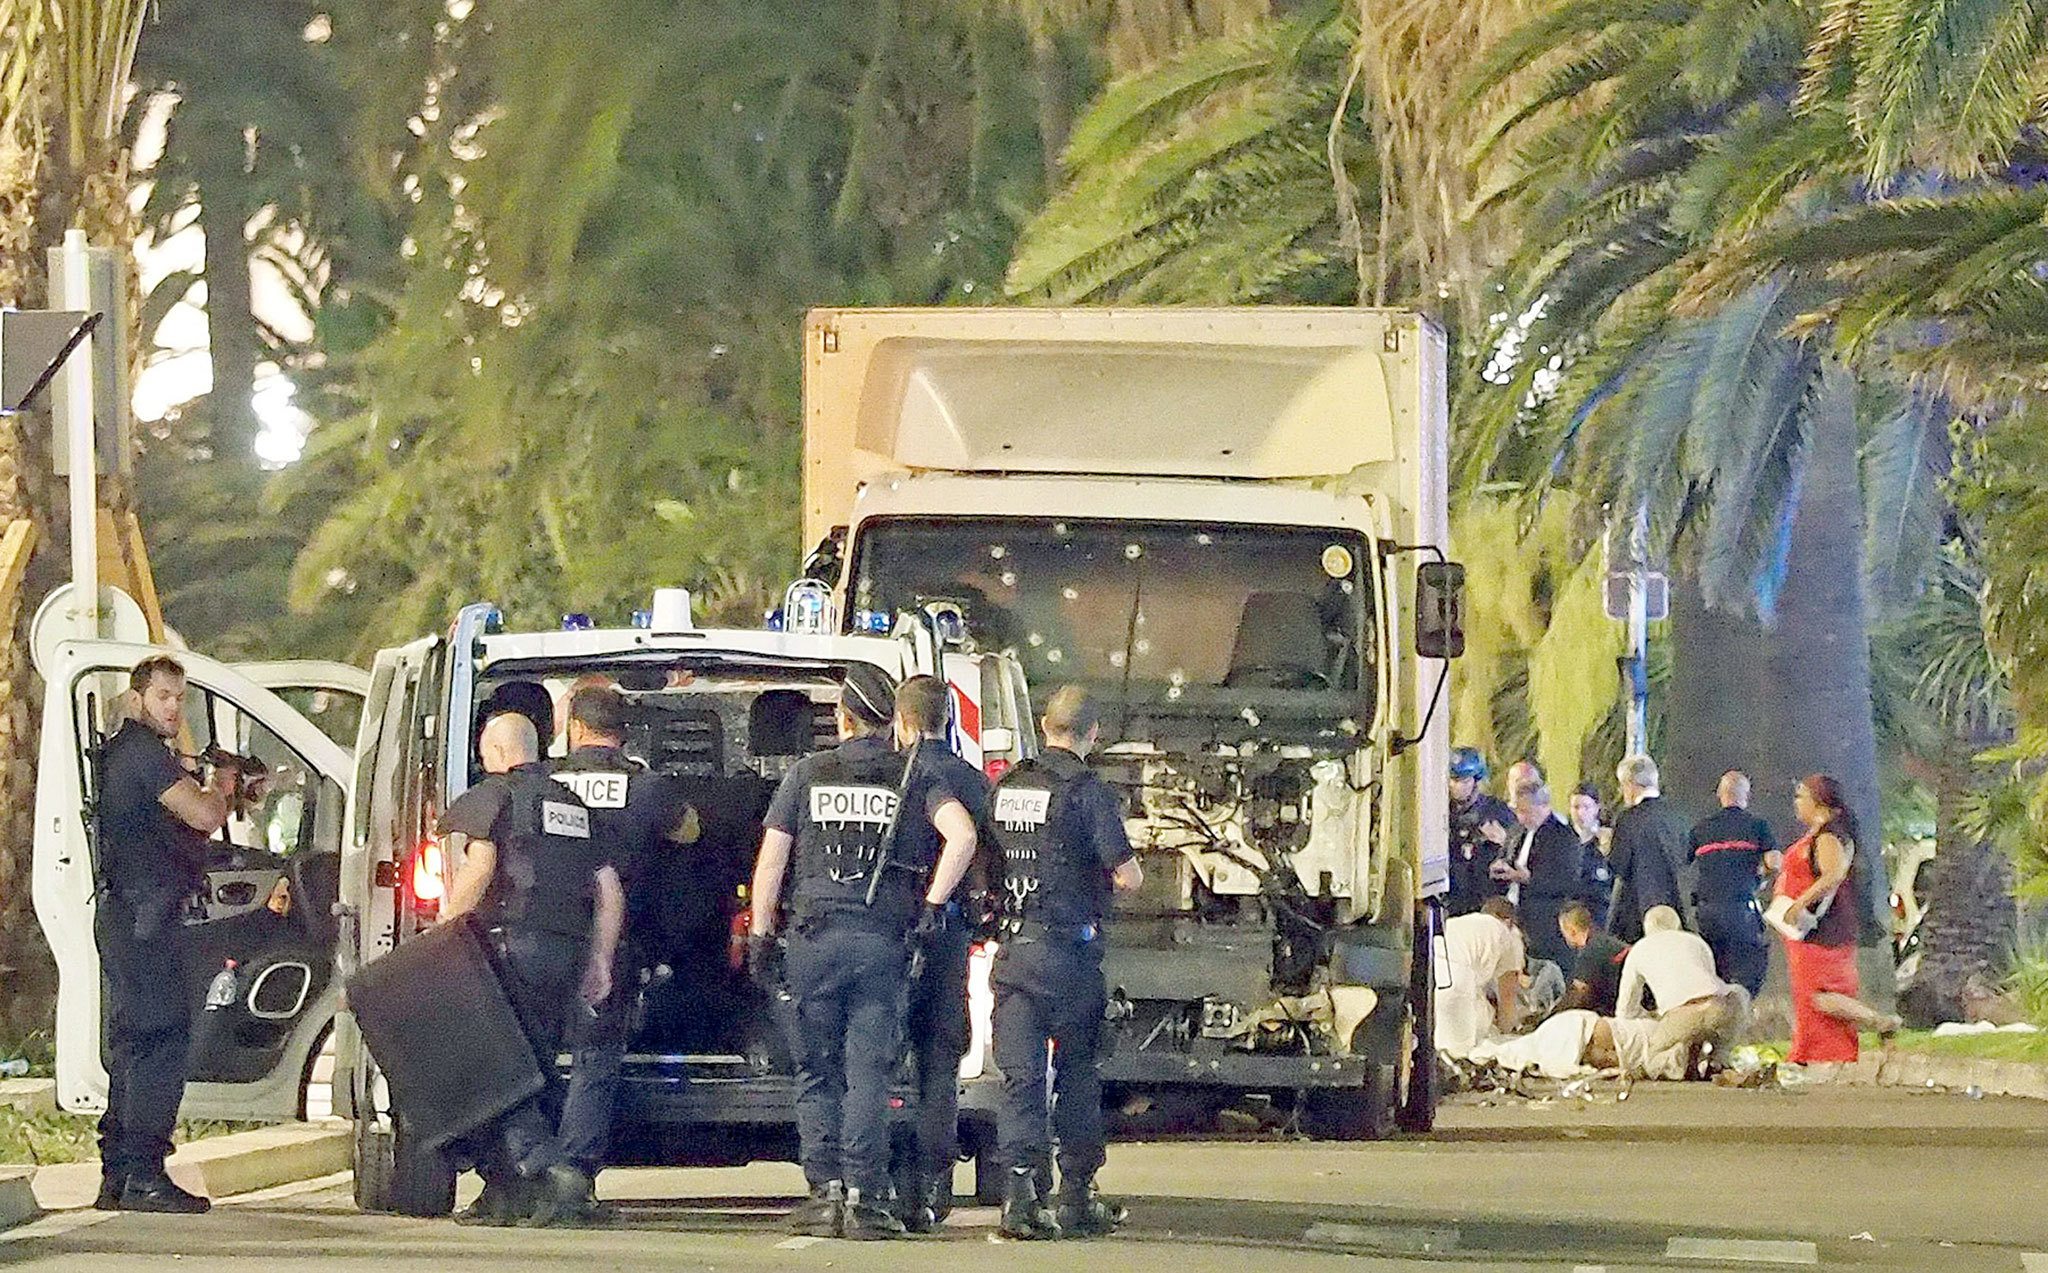 Police stand by as medical personnel attend a person on the ground (right) in the early hours of Friday on the Promenade des Anglais in Nice, southern France, next to the lorry that had been driven into a crowd of revelers late Thursday. (AP Photo)